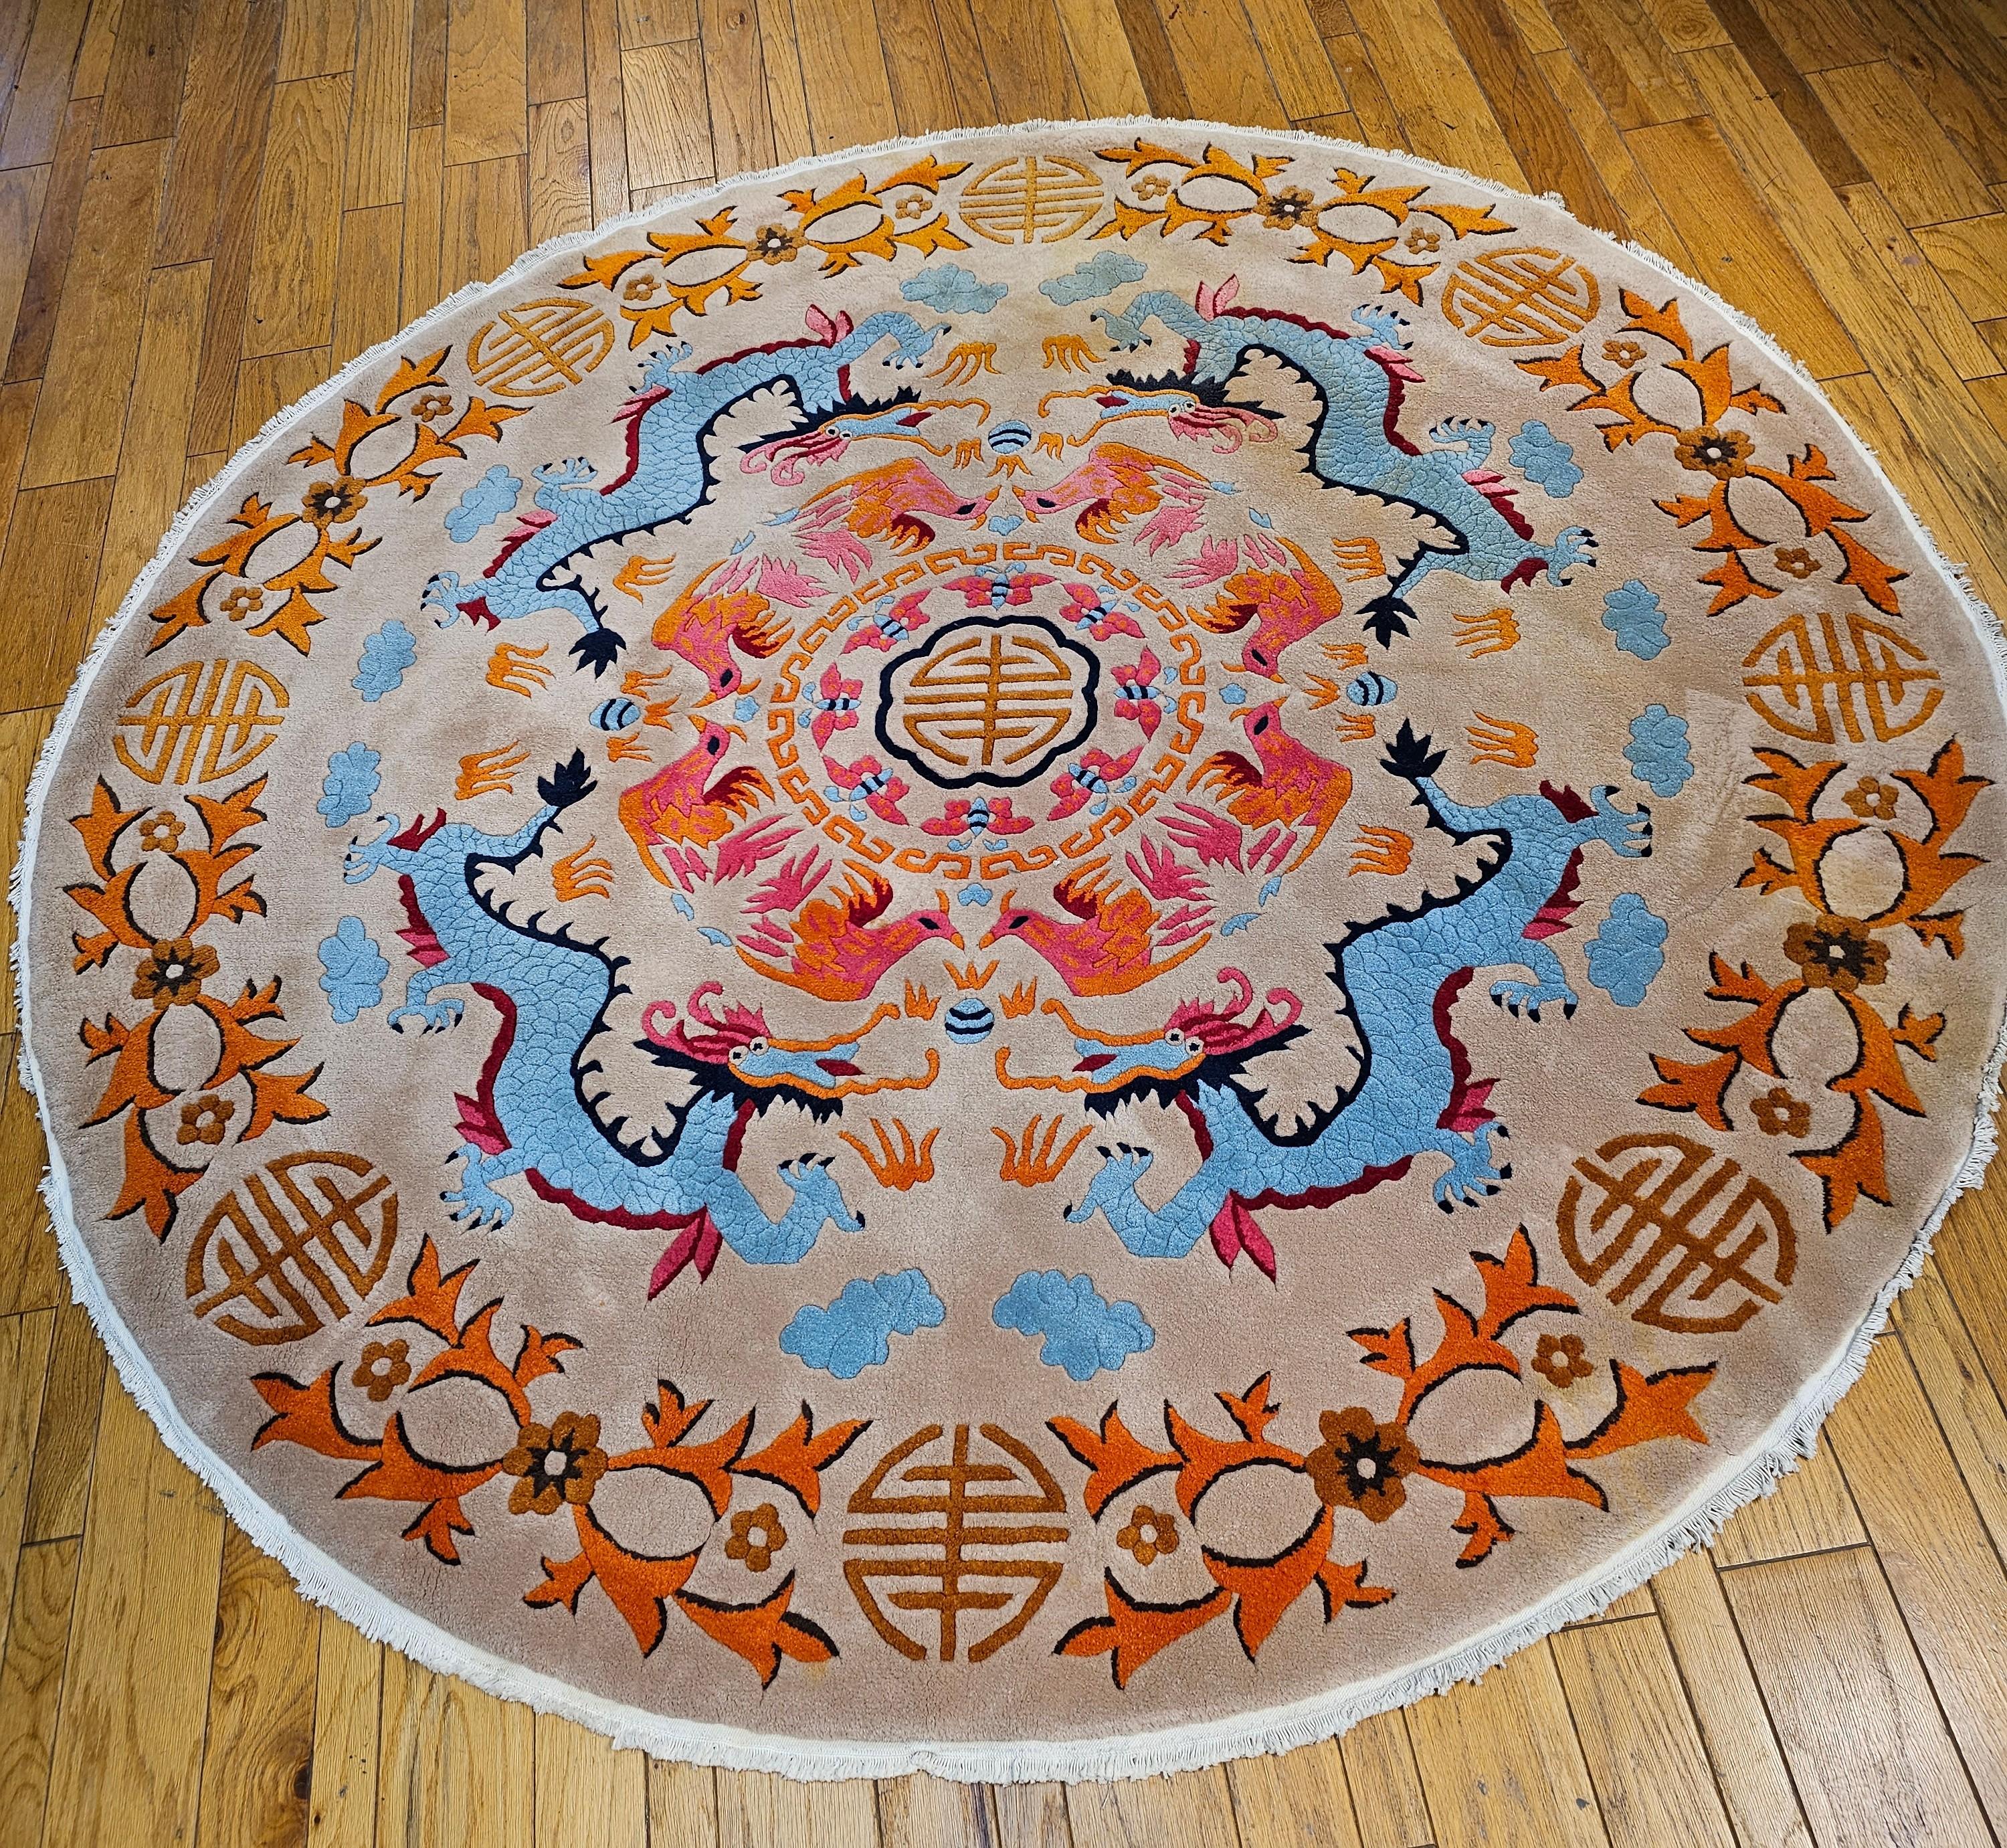 Extremely rare round Chinese Art Deco room size rug in beautiful vibrant colors circa the mid 1900s.  The rug has a fantastic design of four dragons in robin's egg blue with a symbol of fortune in the center surrendered by rooster designs in